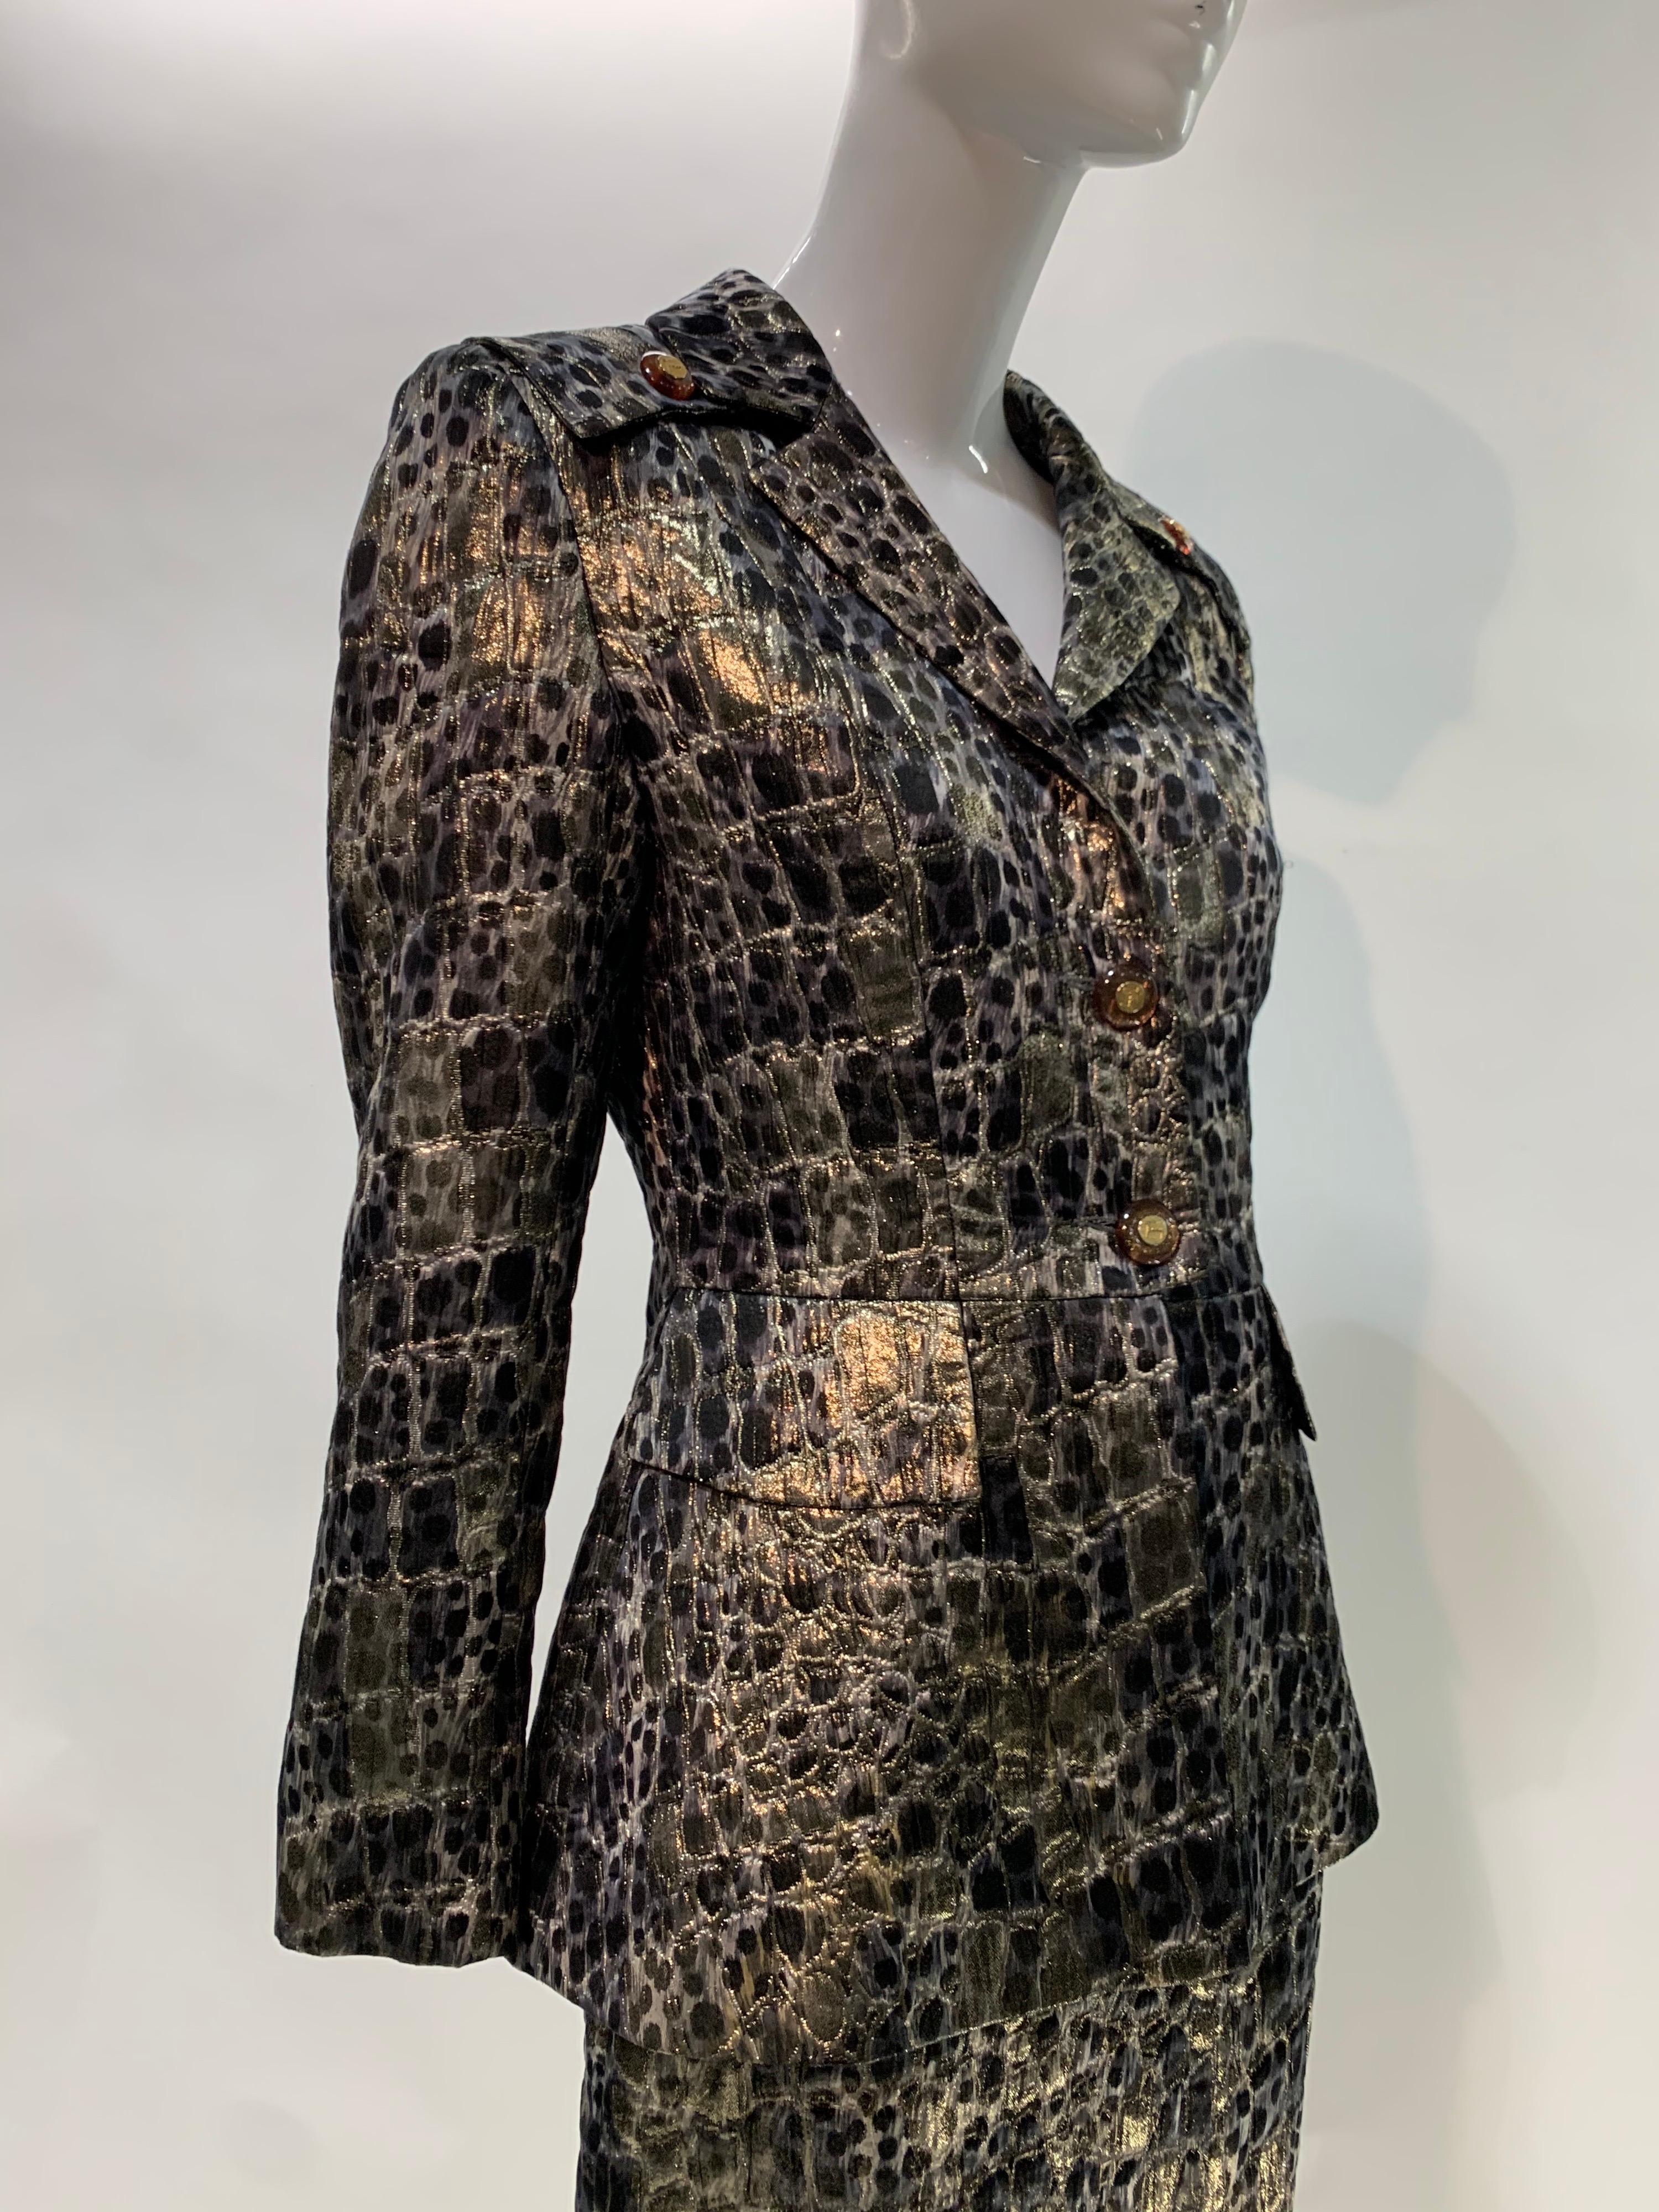 A fabulous 1980s signature Thierry Mugler for Terry metallic military pattern silk, wool and lurex brocade skirt suit. Classic military touches like epaulets, belted back and high pocket flaps. Stunning. Size 4-6. 